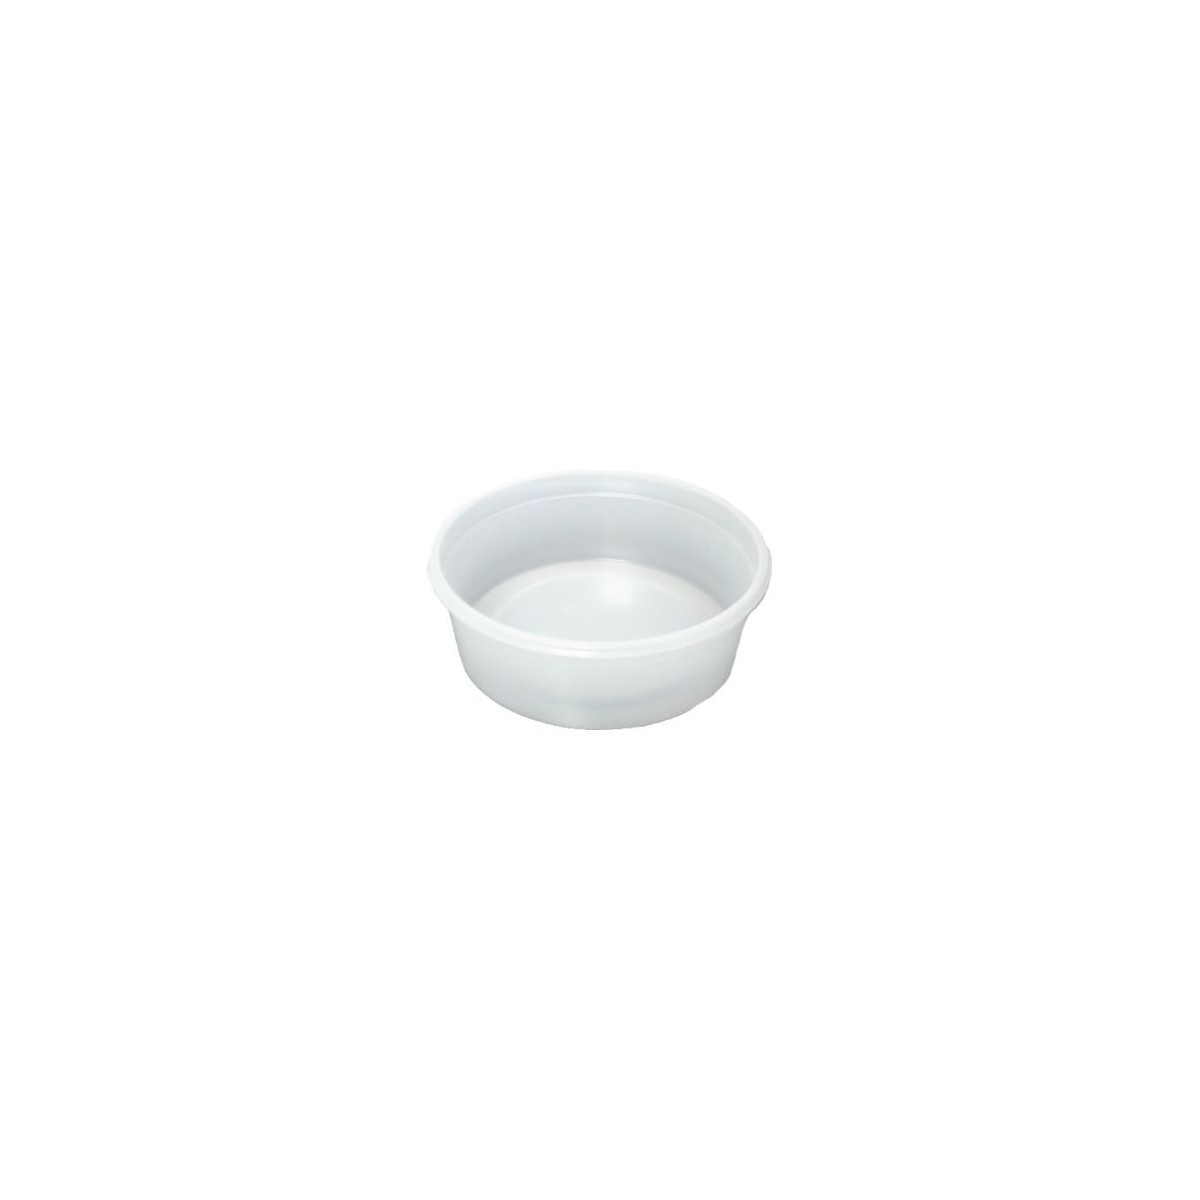 PLASTIC POT FOR BABY CUP 3/32 Ø94X32MM 1000 PIECES FOST+2020 INCLUDED 2,965704€  BOX